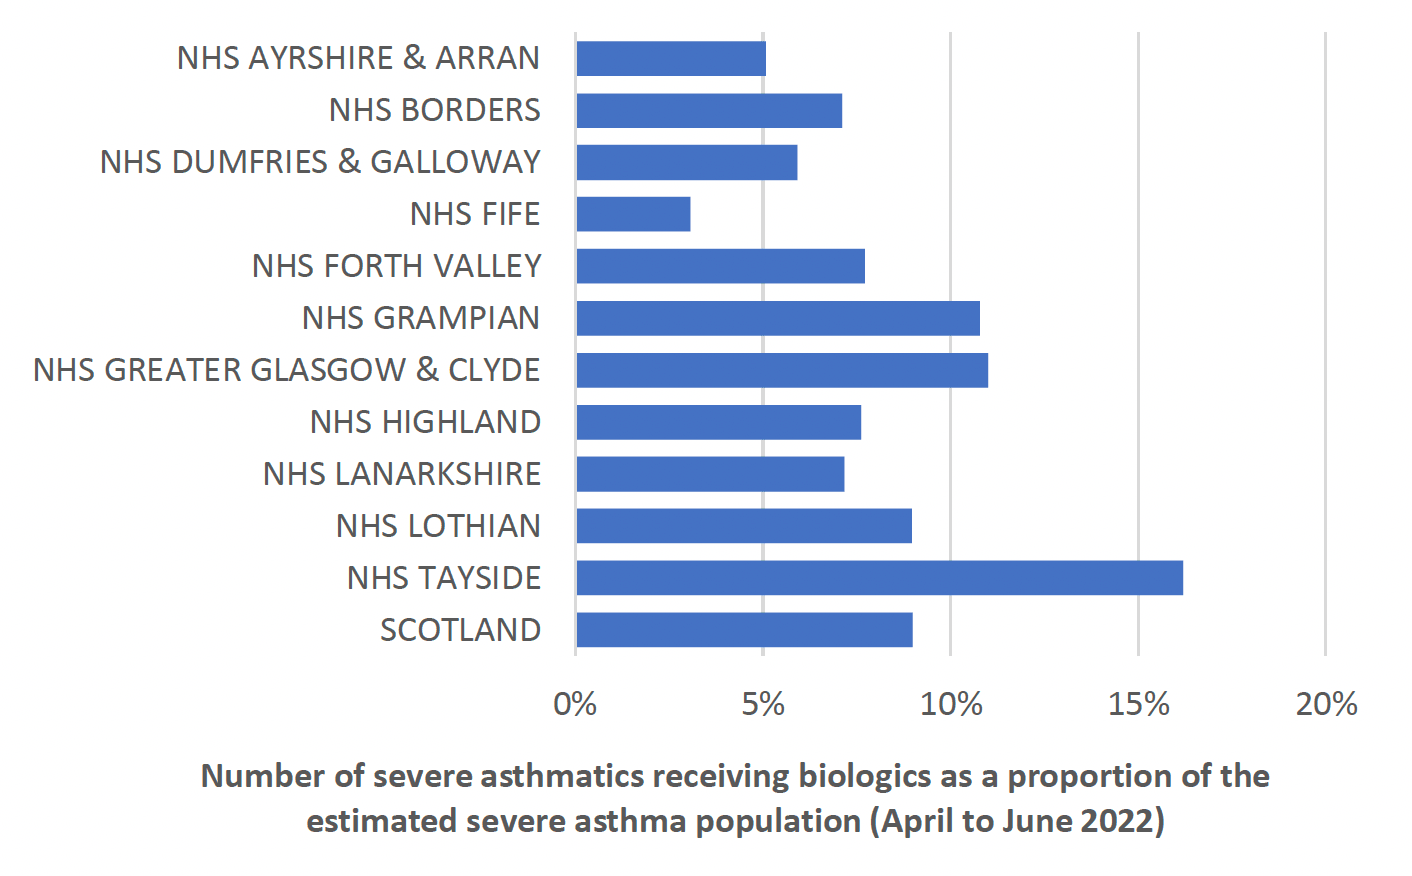 Chart showing variance across health boards and Scotland of people with severe asthma receiving biologics from April to June 2022. Shows significant variance across health boards